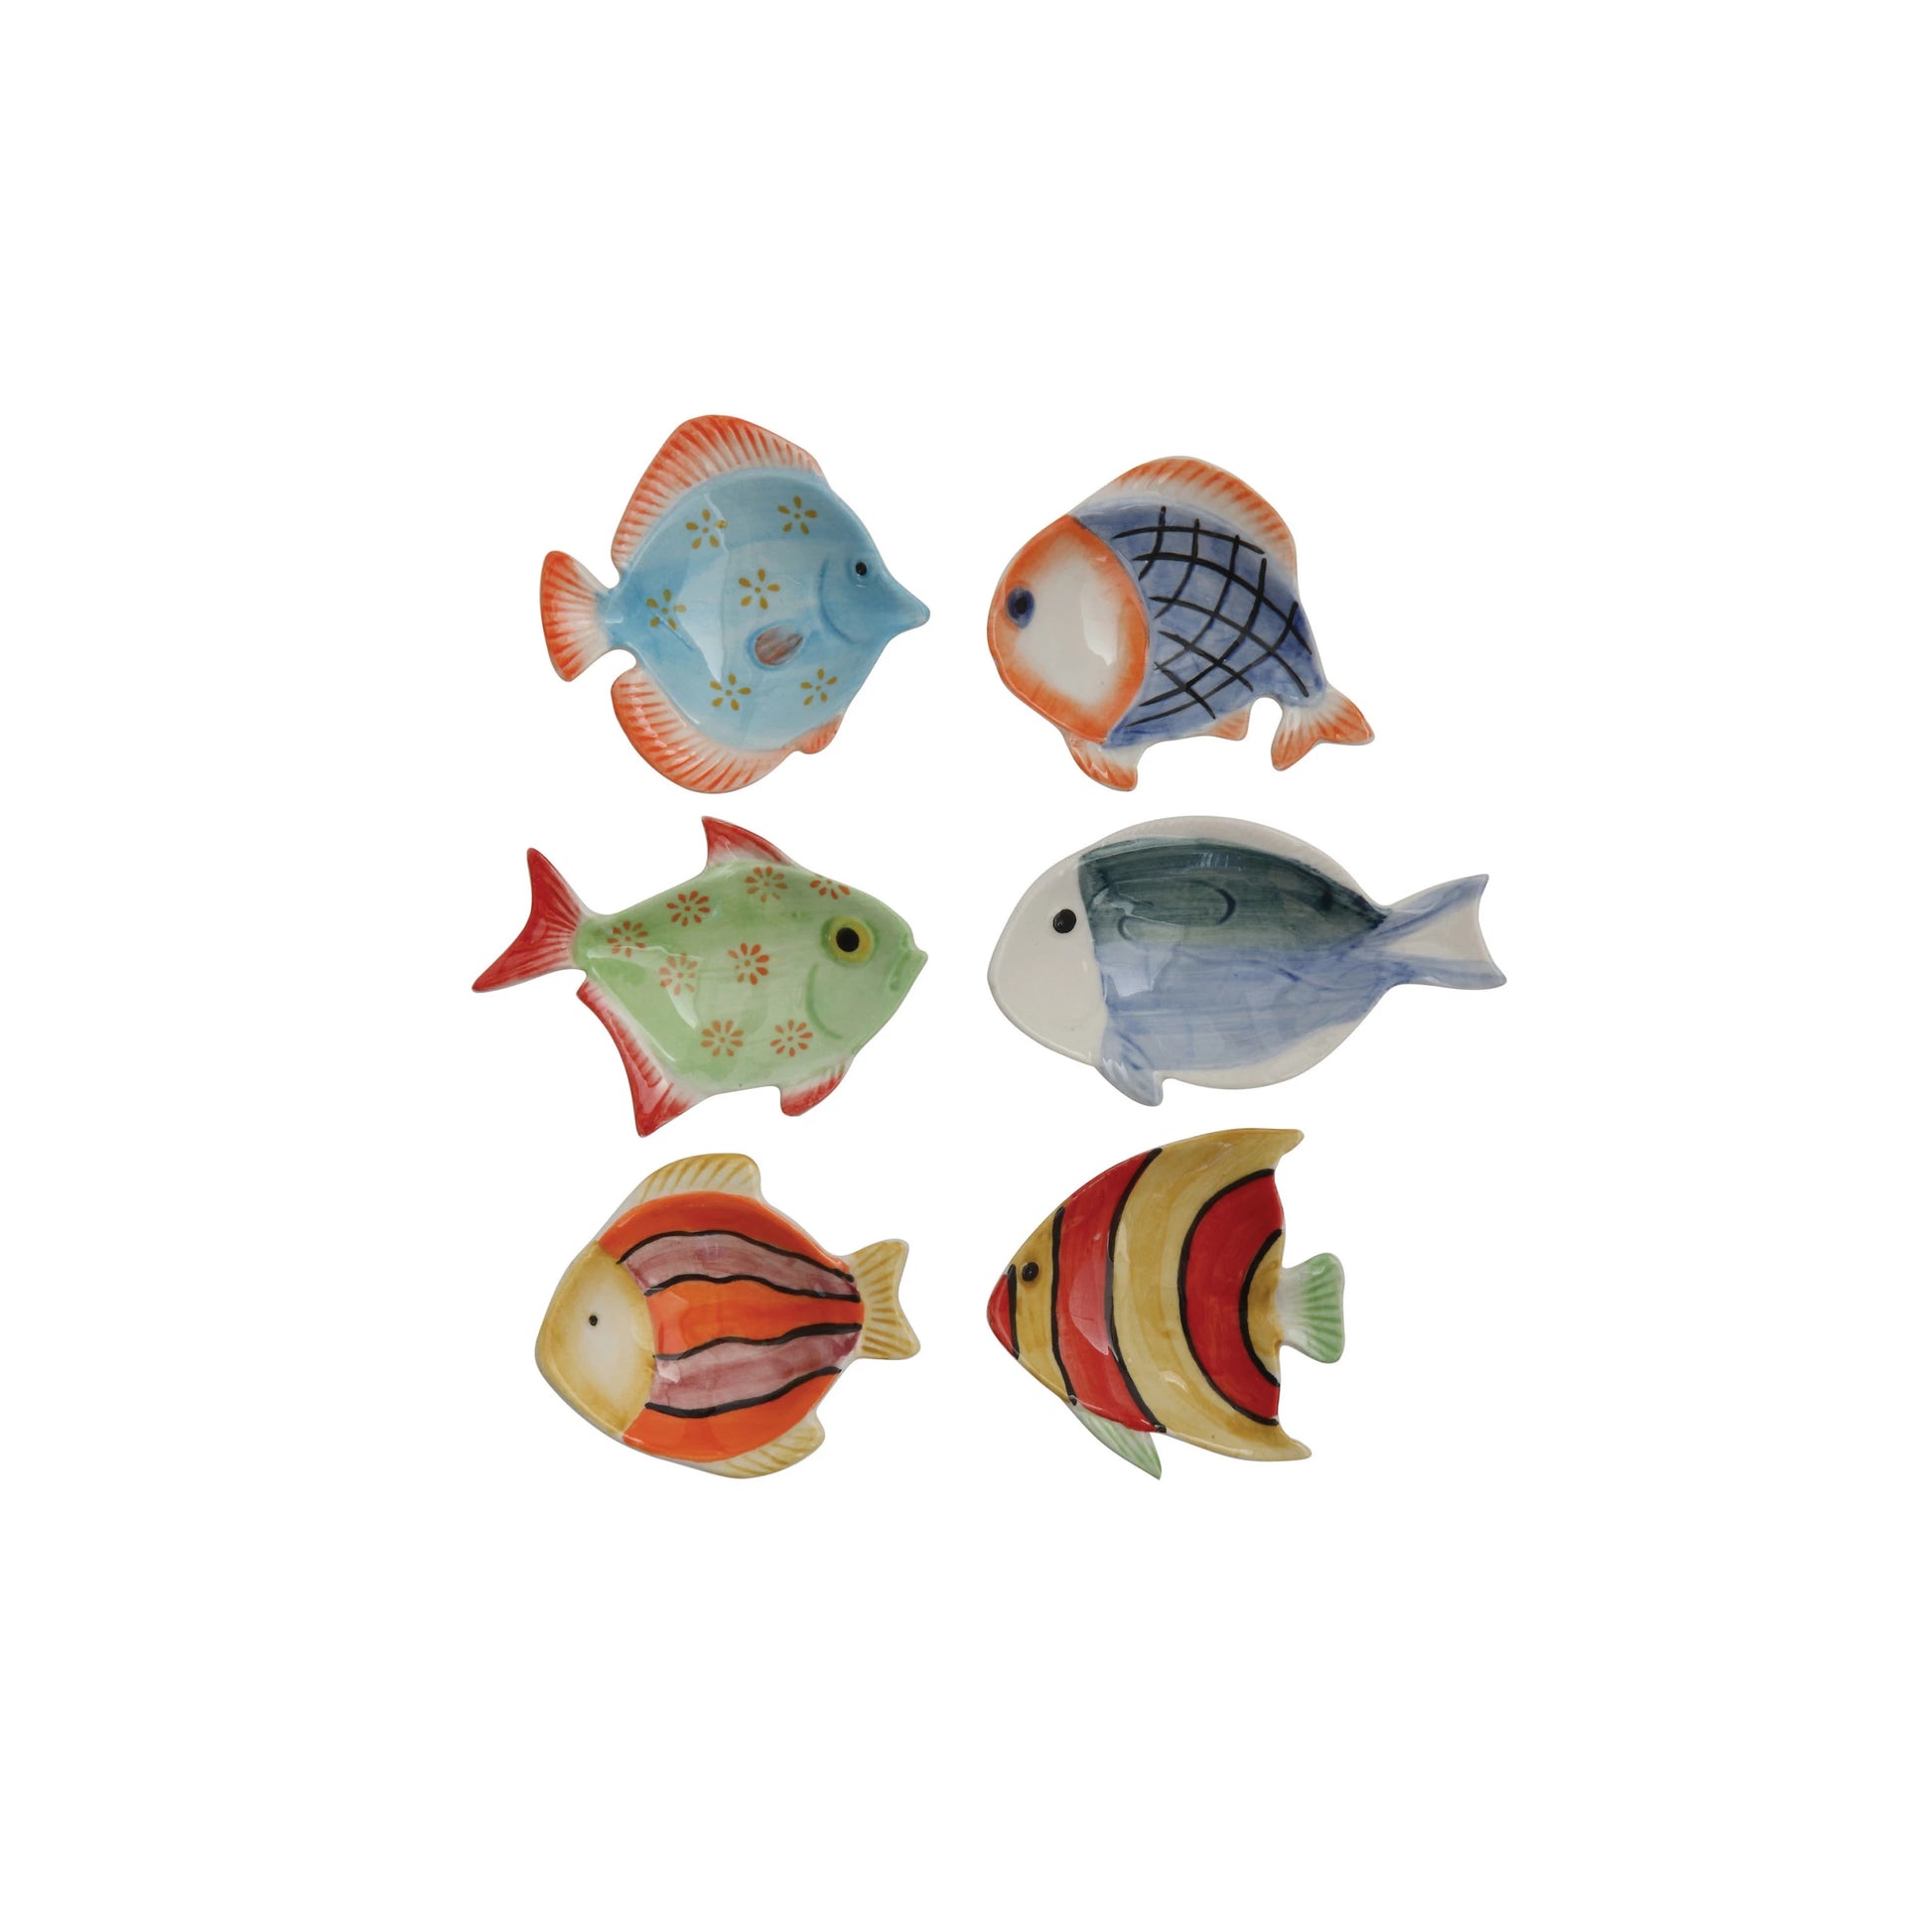 6 styles of fish dishes in 2 rows on a white background.